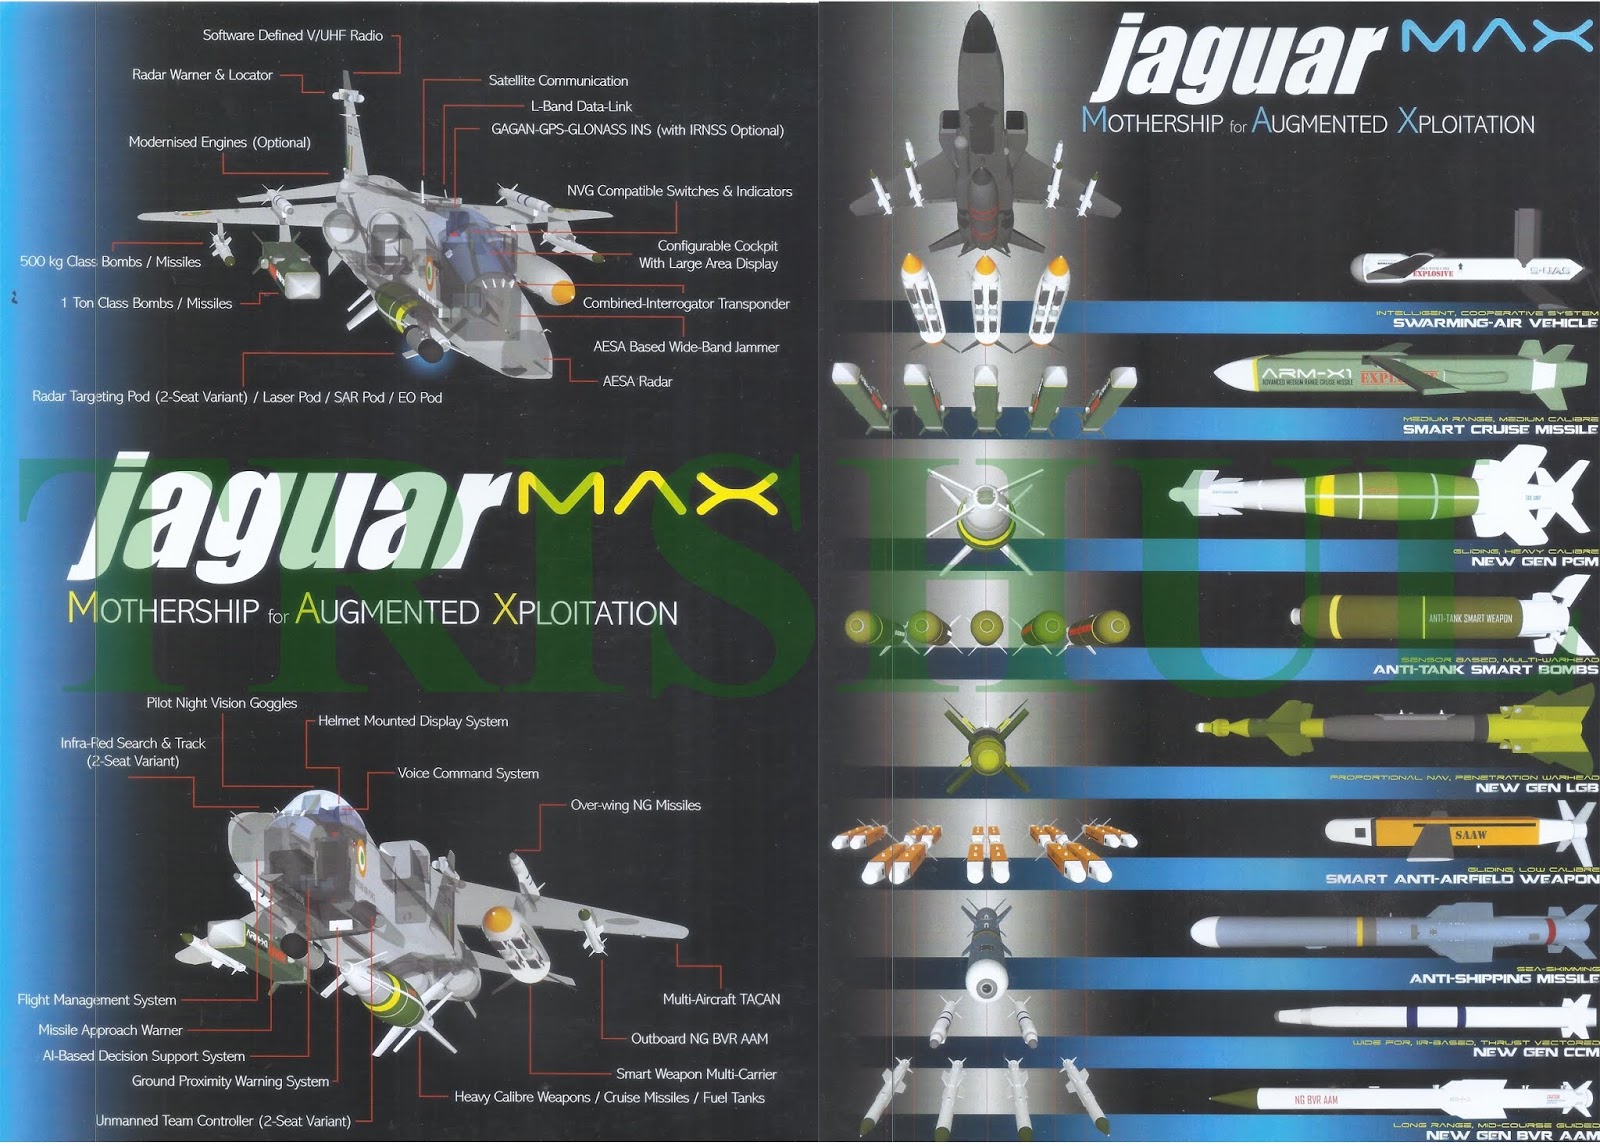 Tejas Mk2 (Medium Weight Fighter) - News and discussions | Strategic